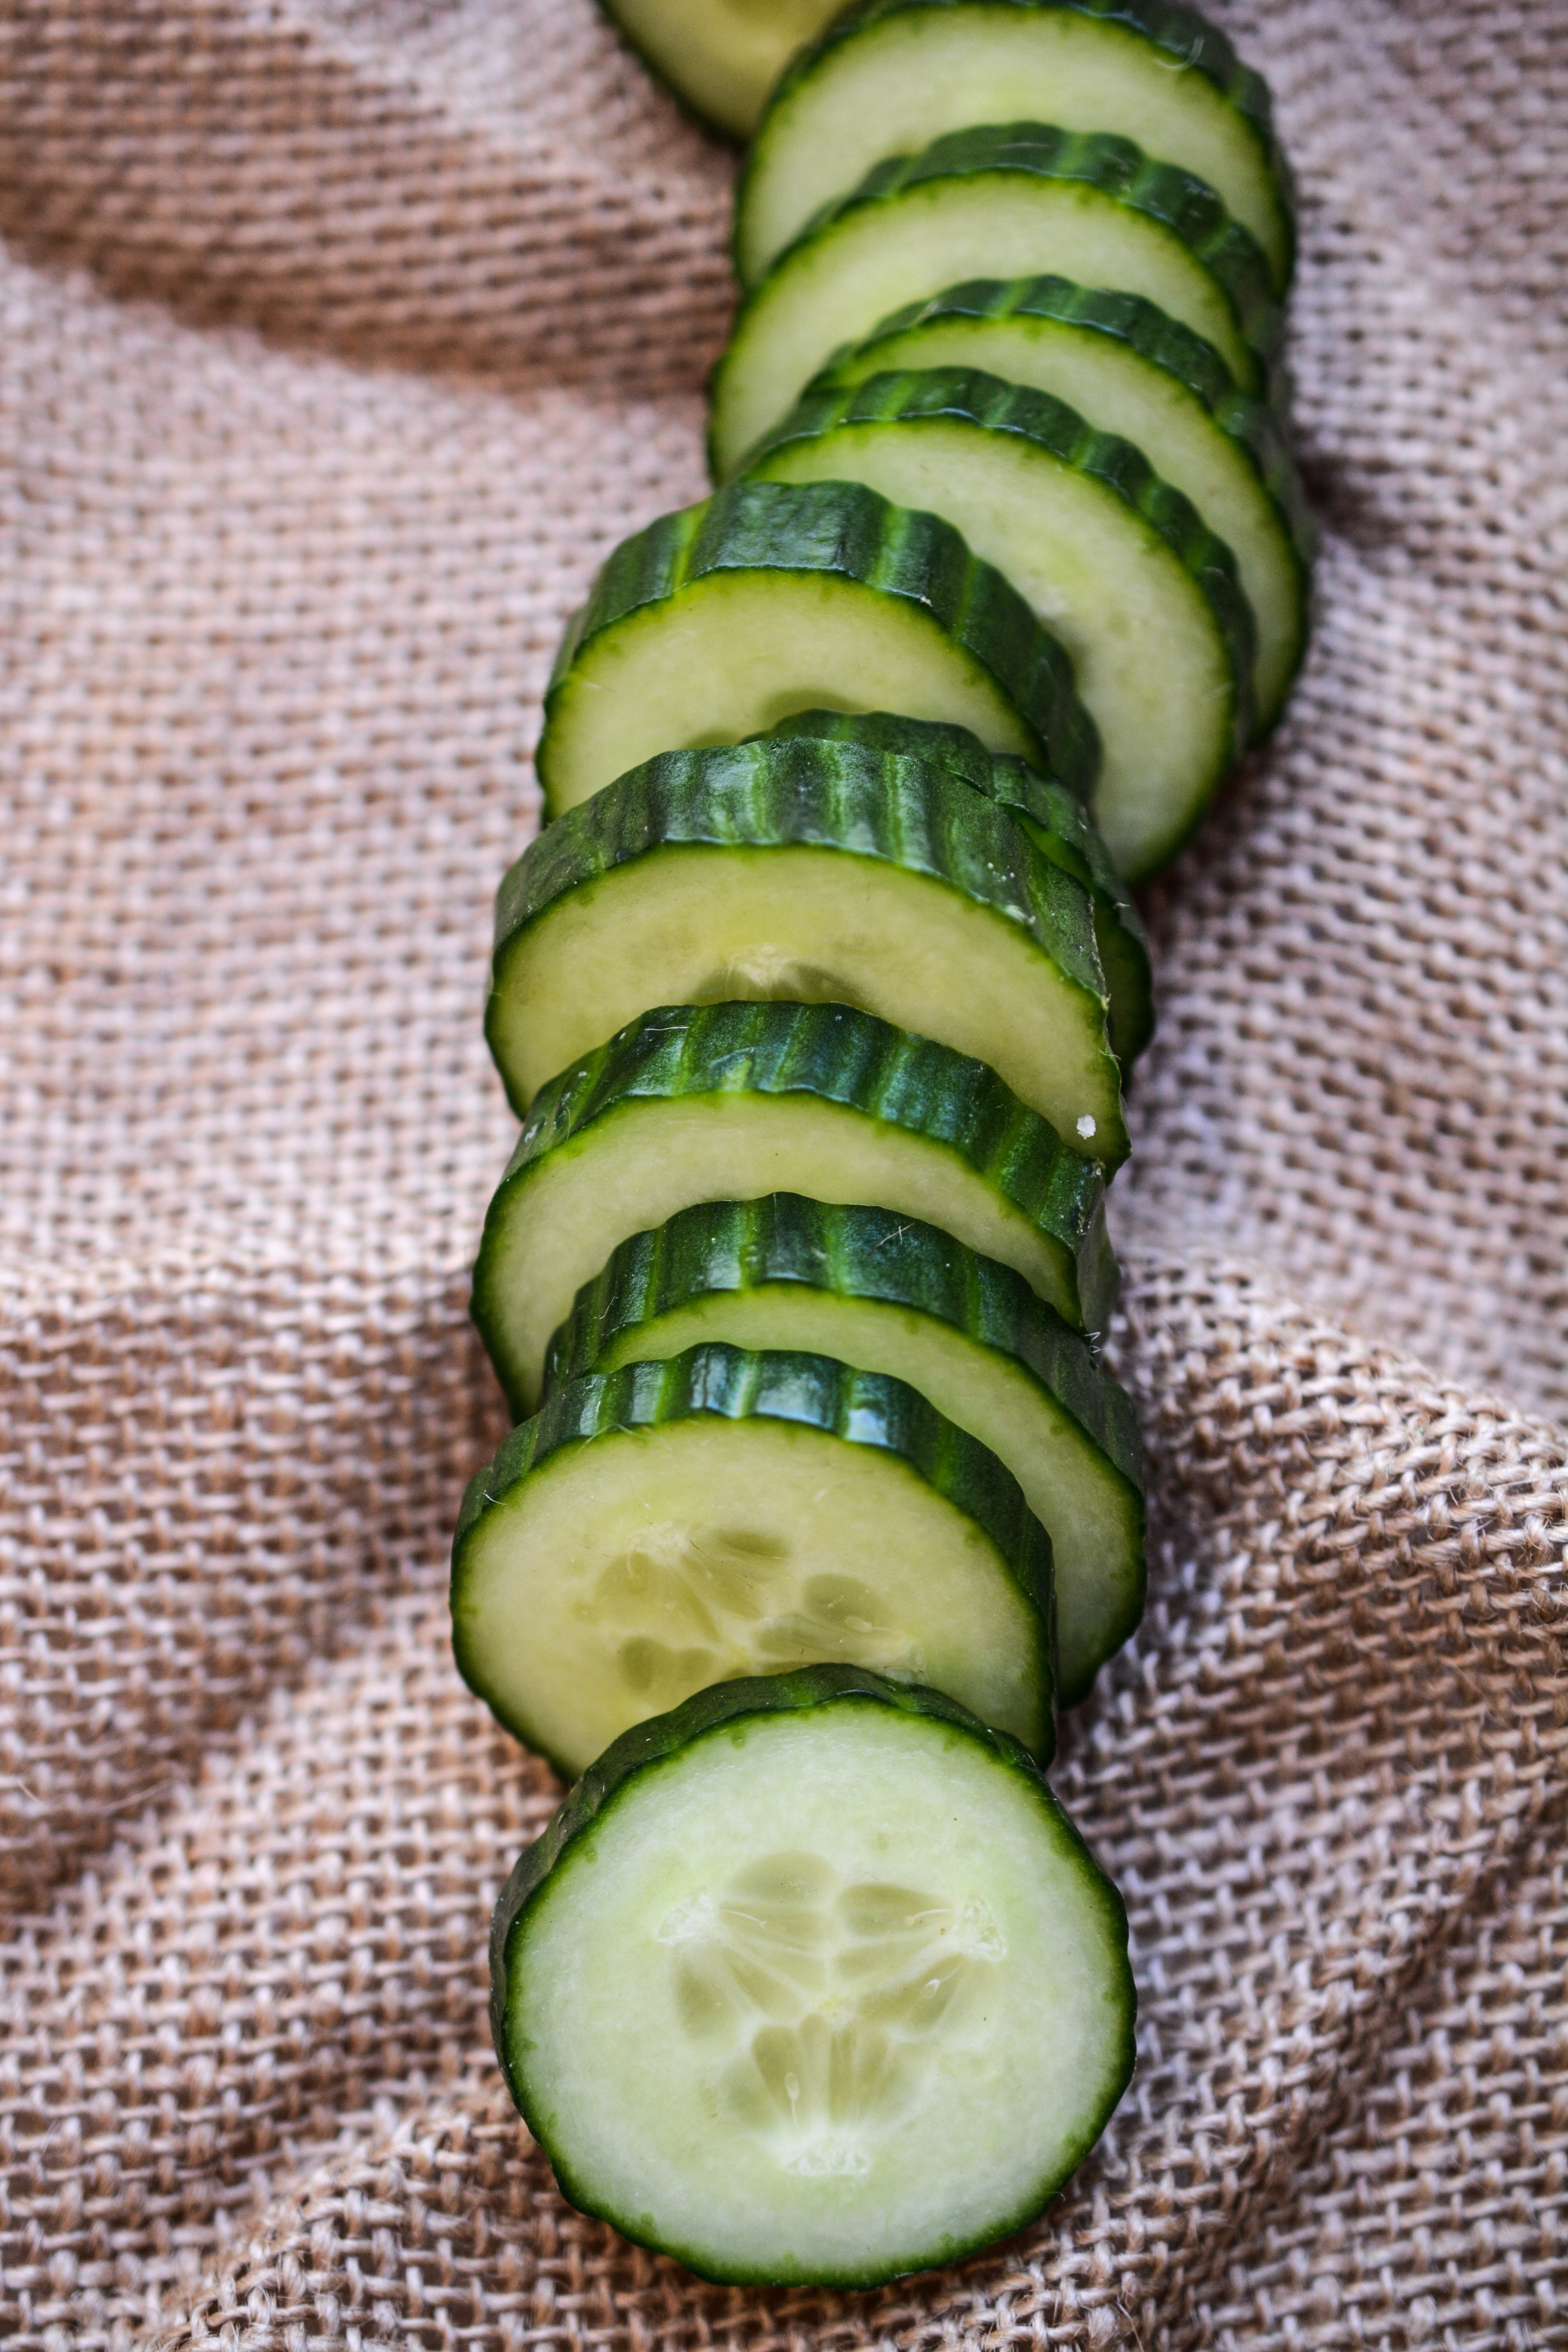 Cucumber, Slices, Green, Fresh, Healthy, cucumber, green color